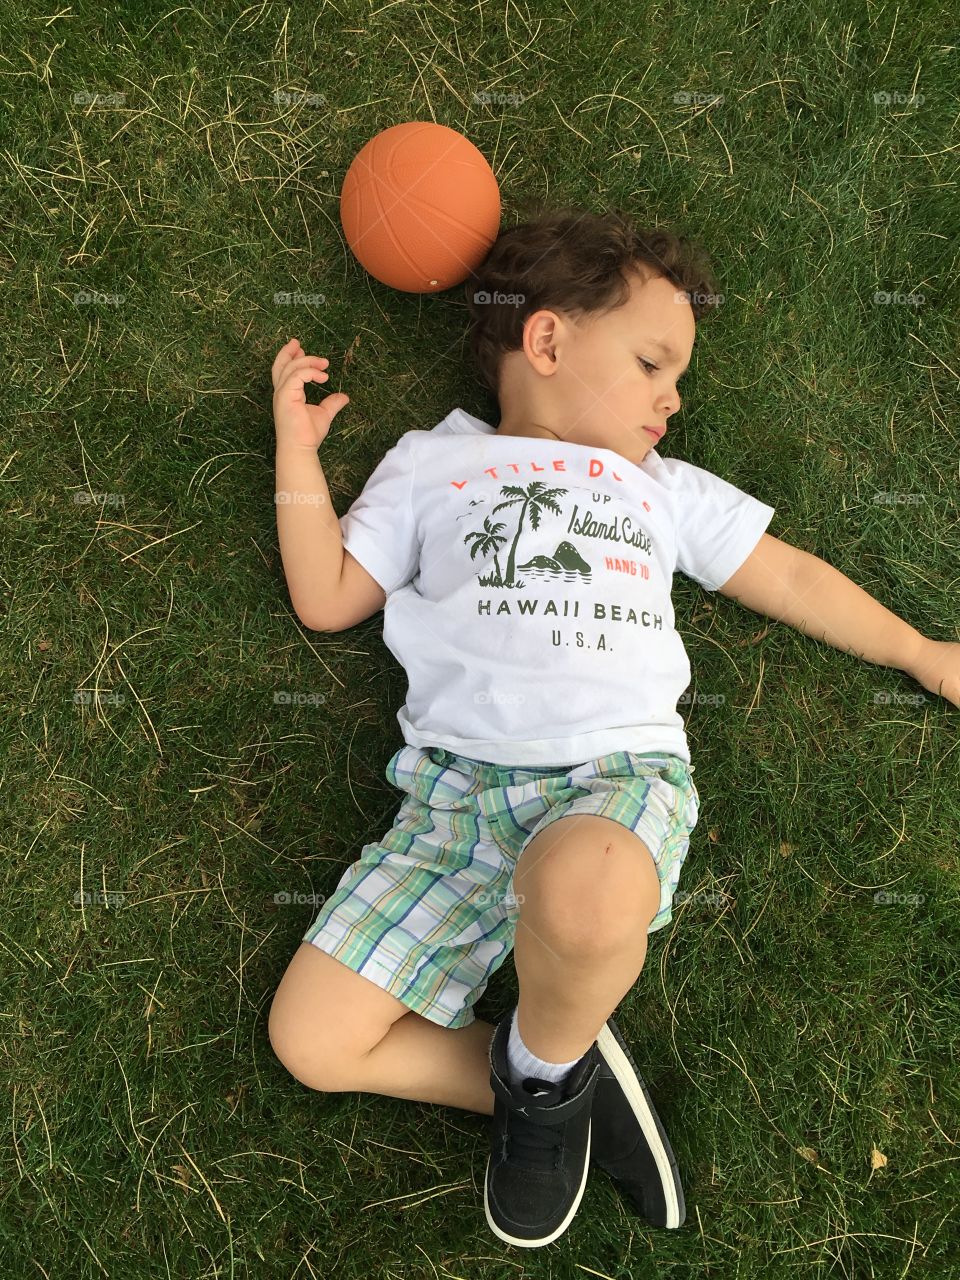 Little boy laying on the grass with his ball.